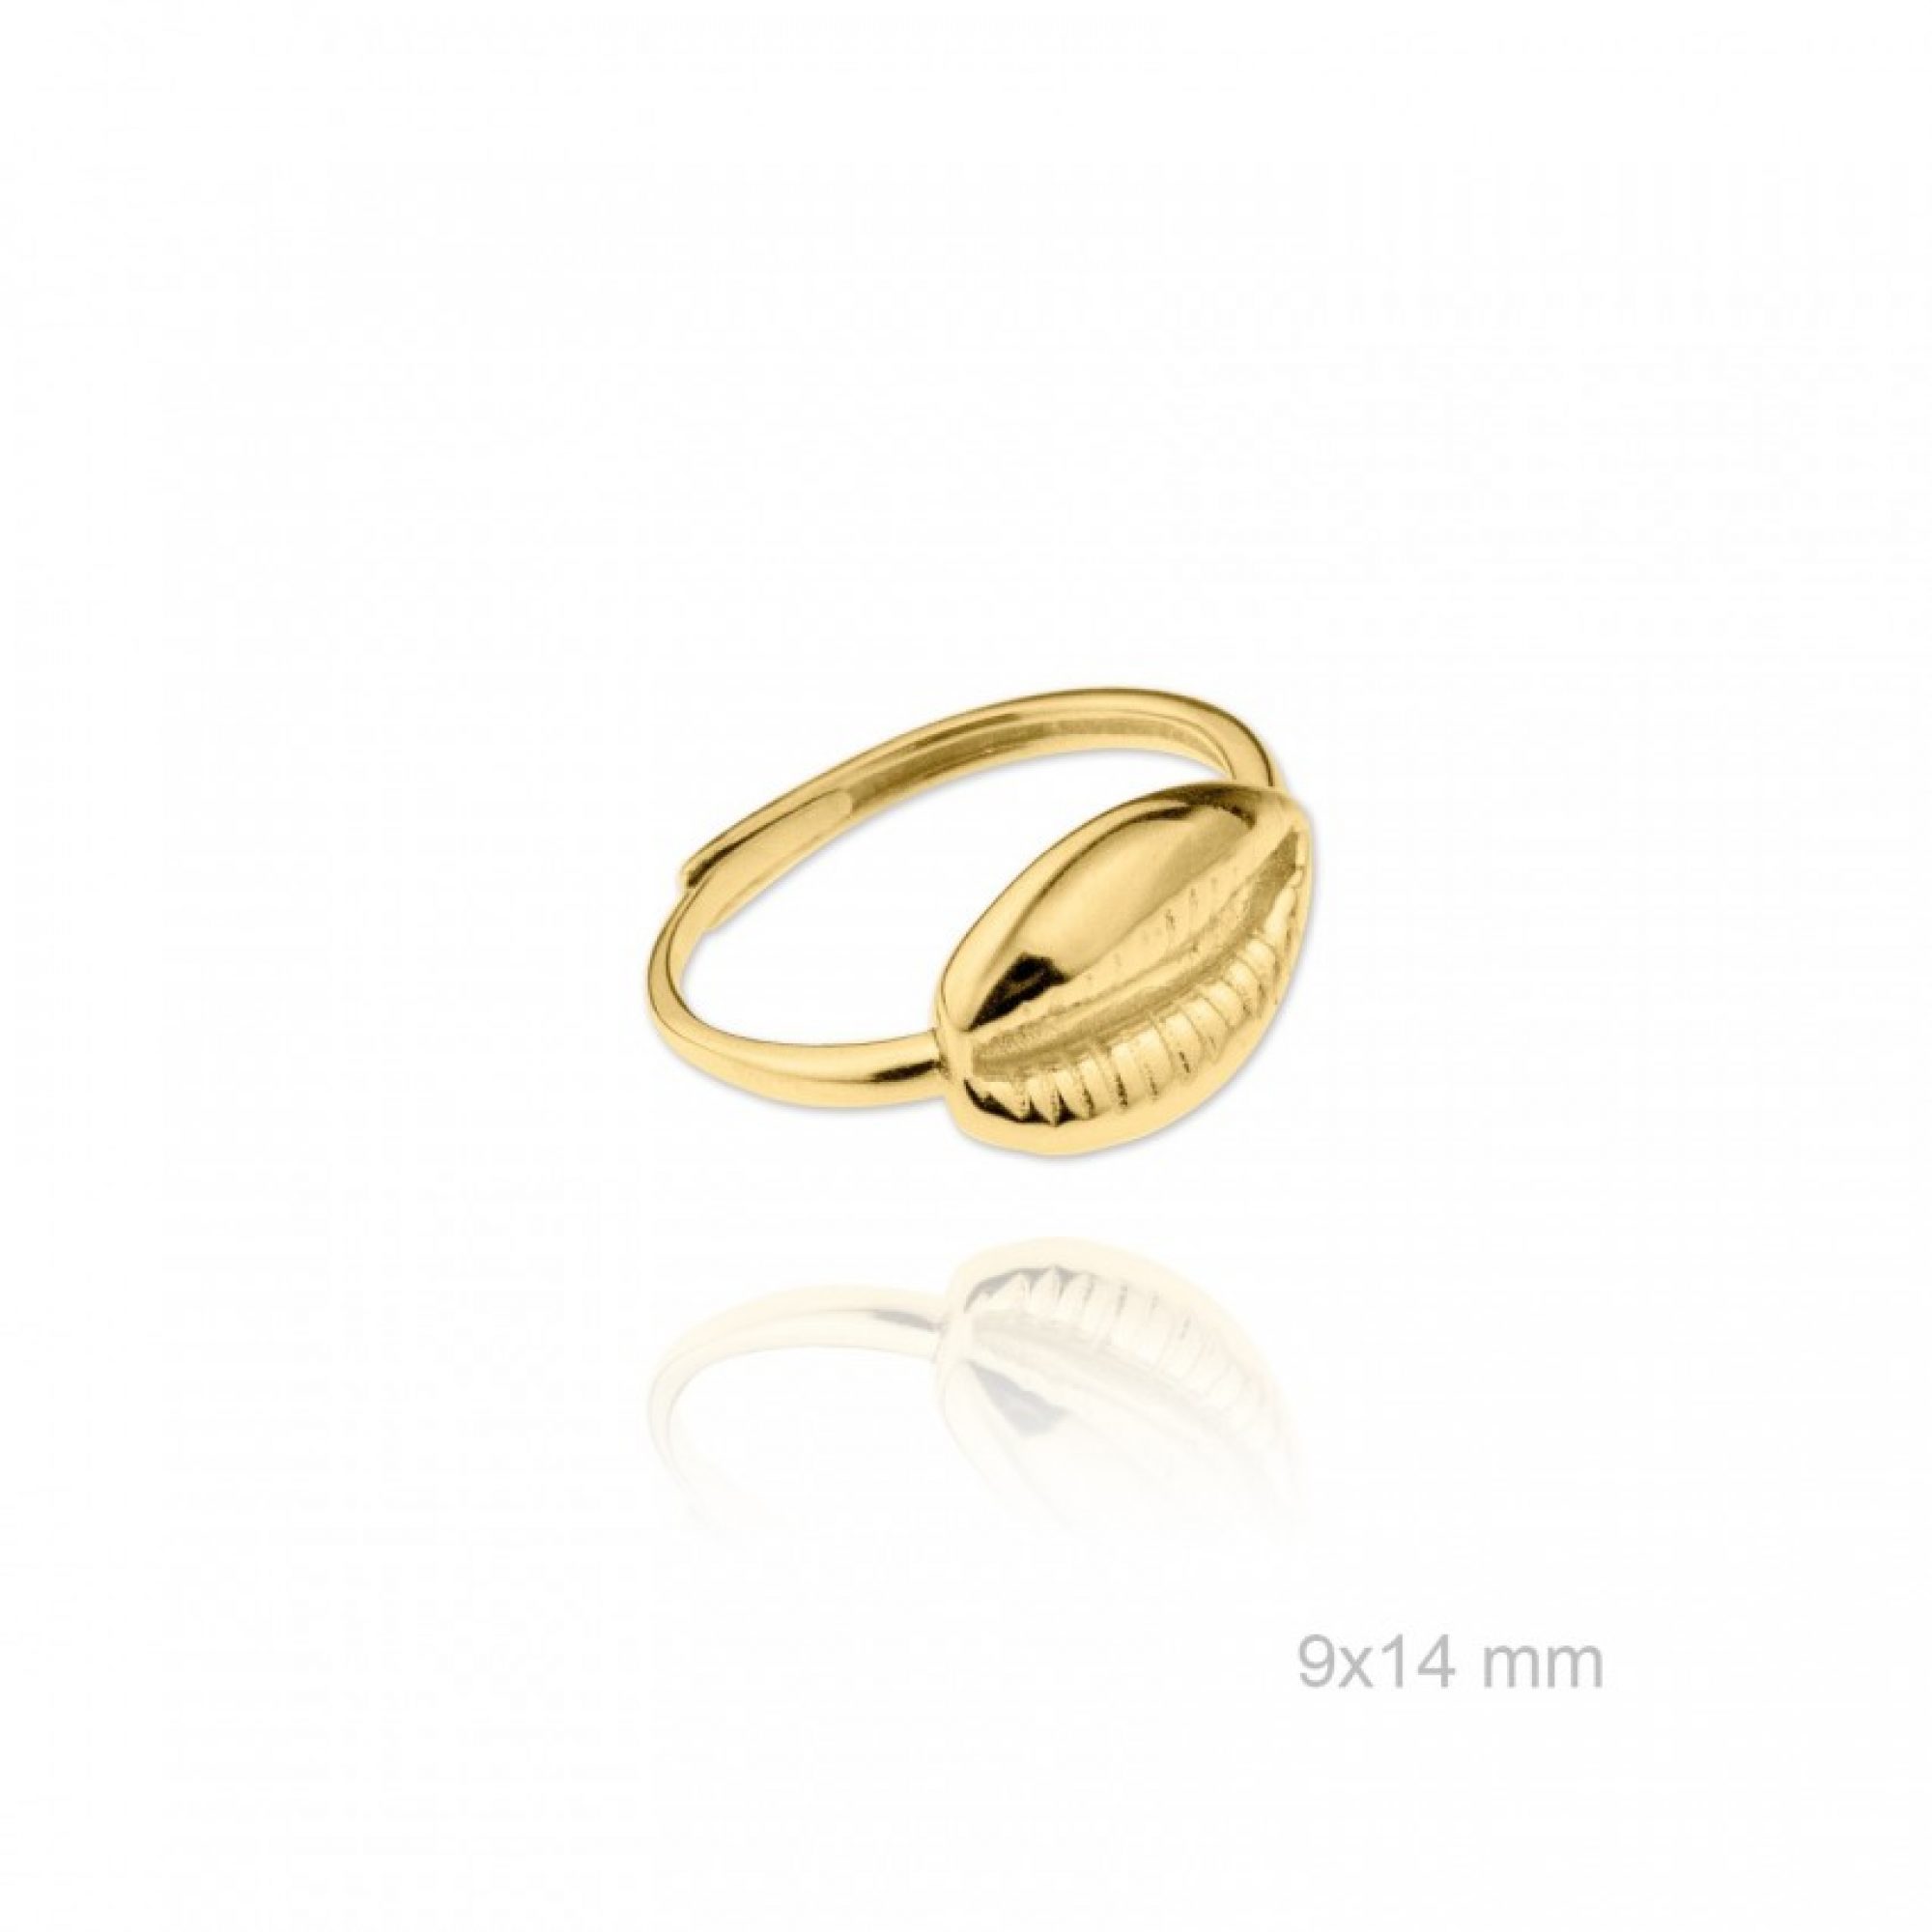 Gold plated seashell ring